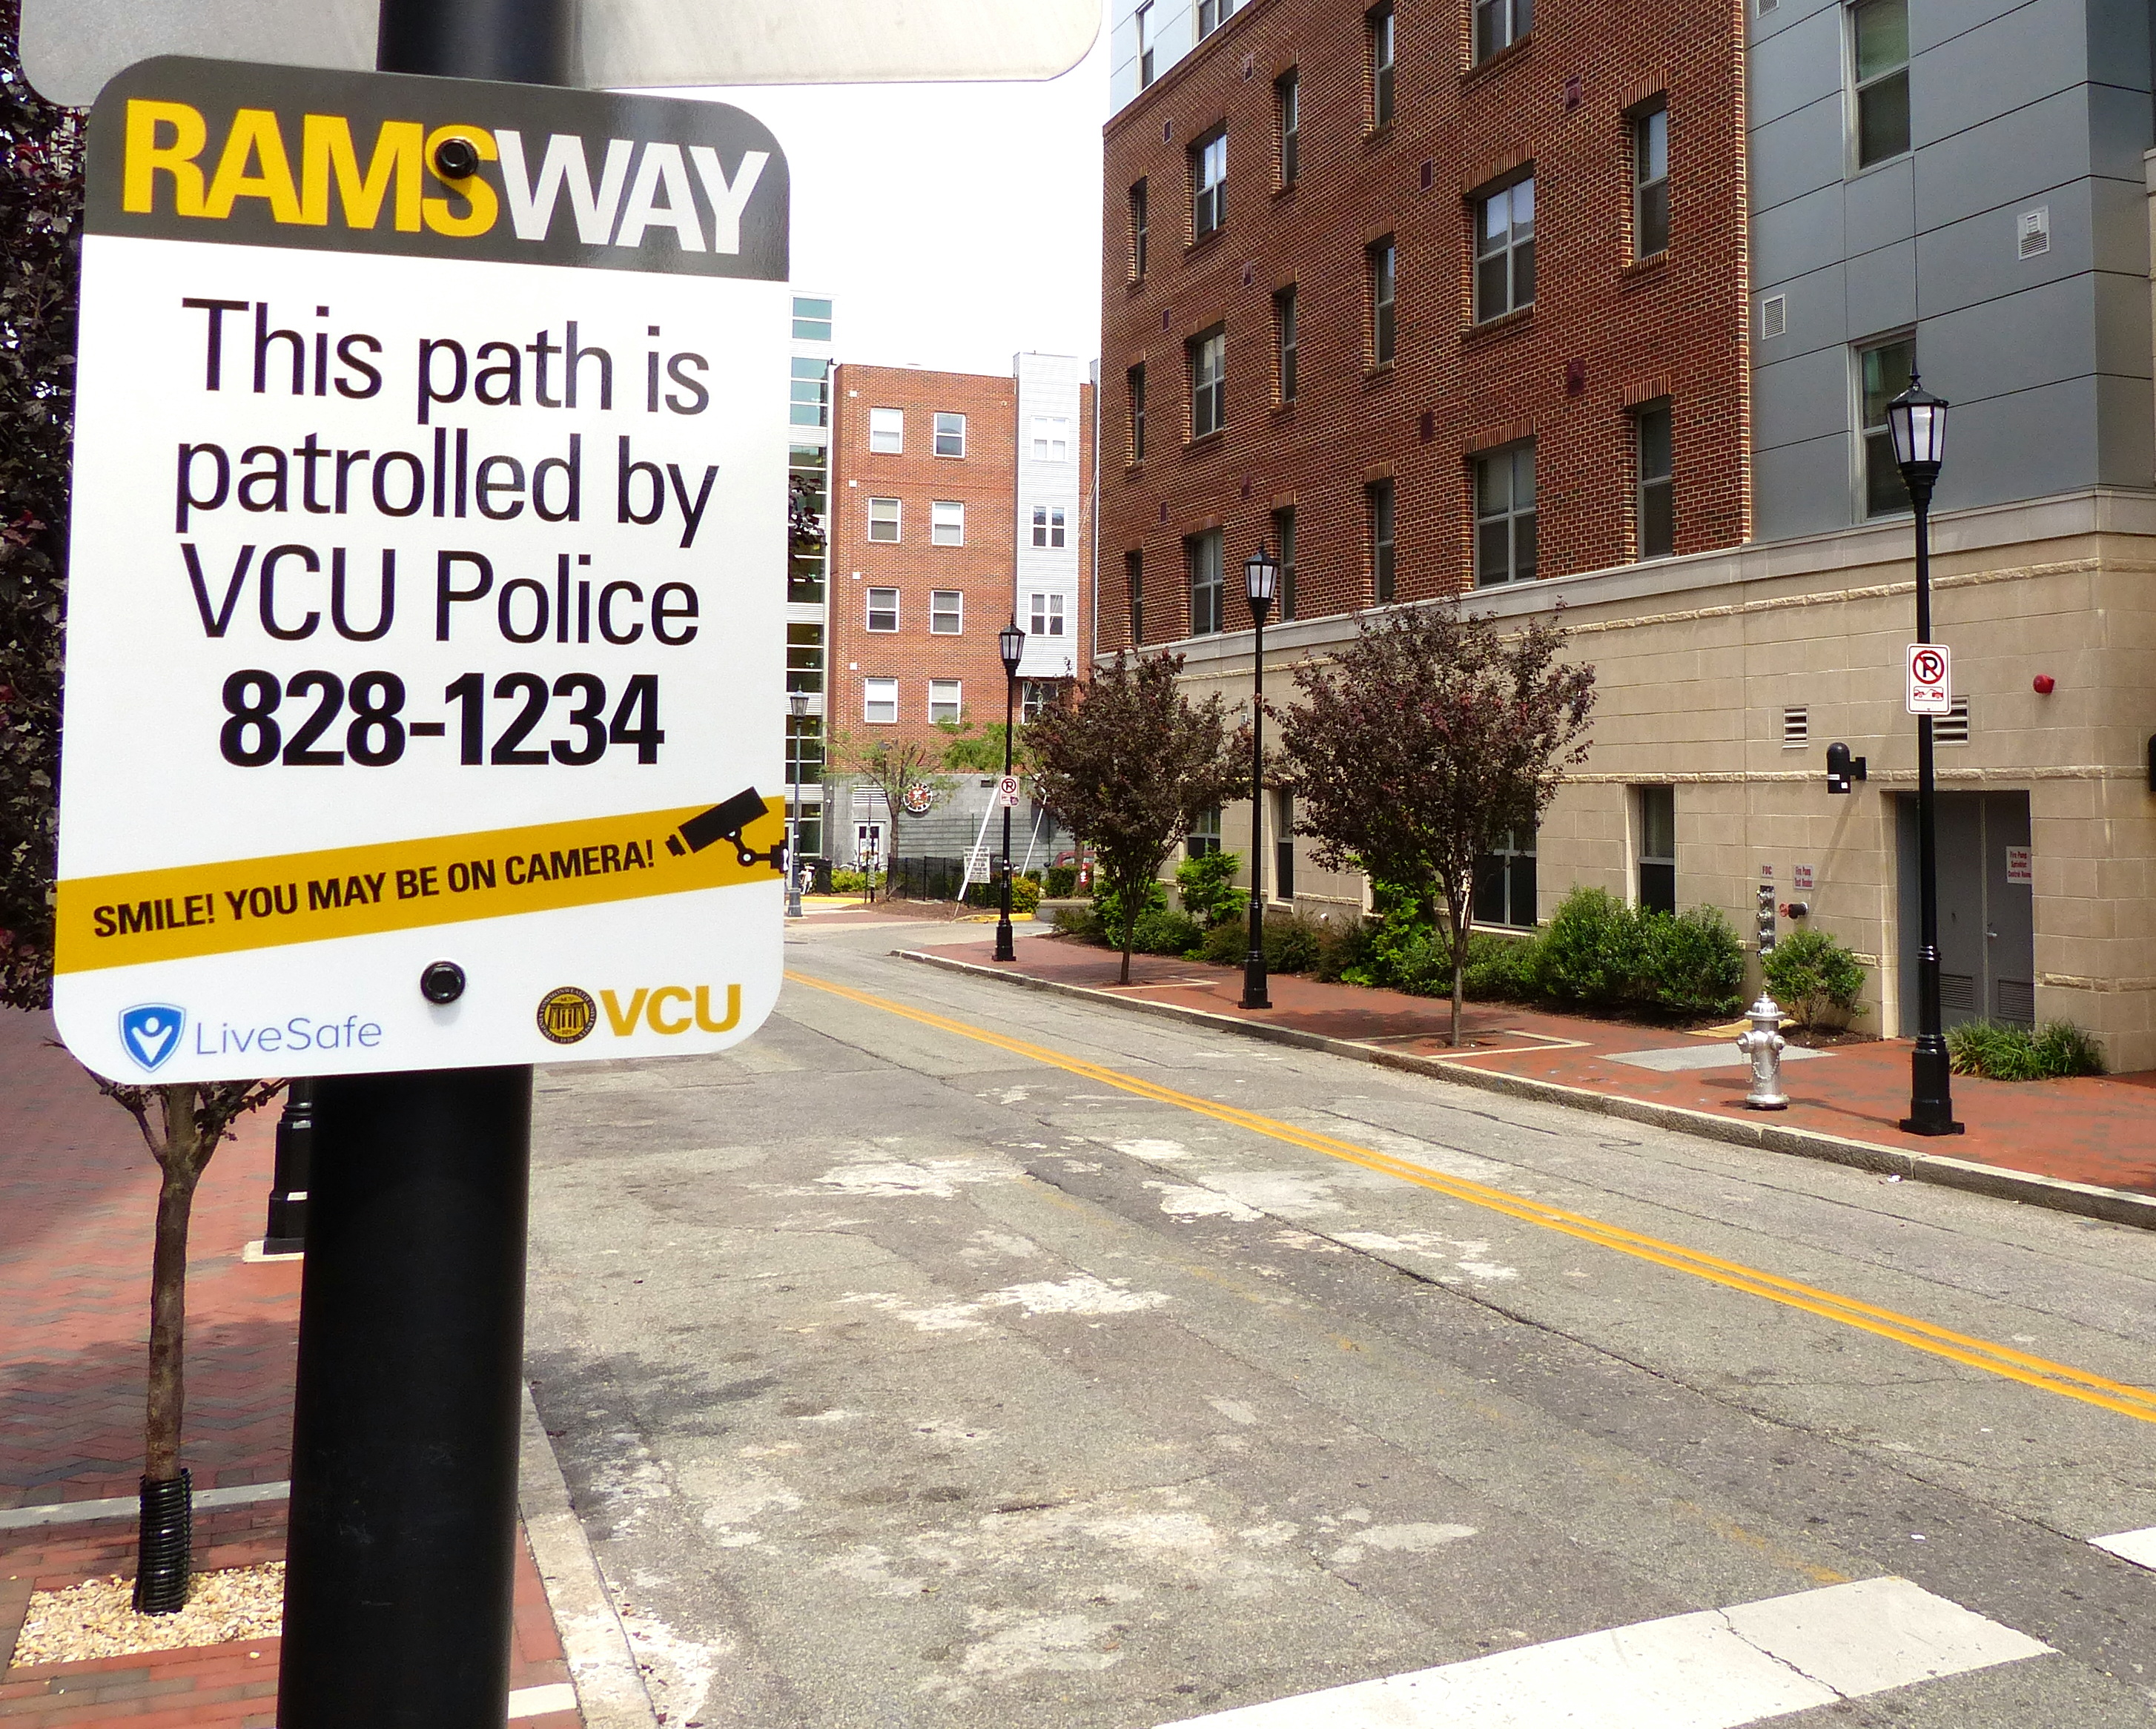 A RamsWay sign is posted near the intersection of Shafer and Franklin Streets on VCU’s Monroe Campus stating 